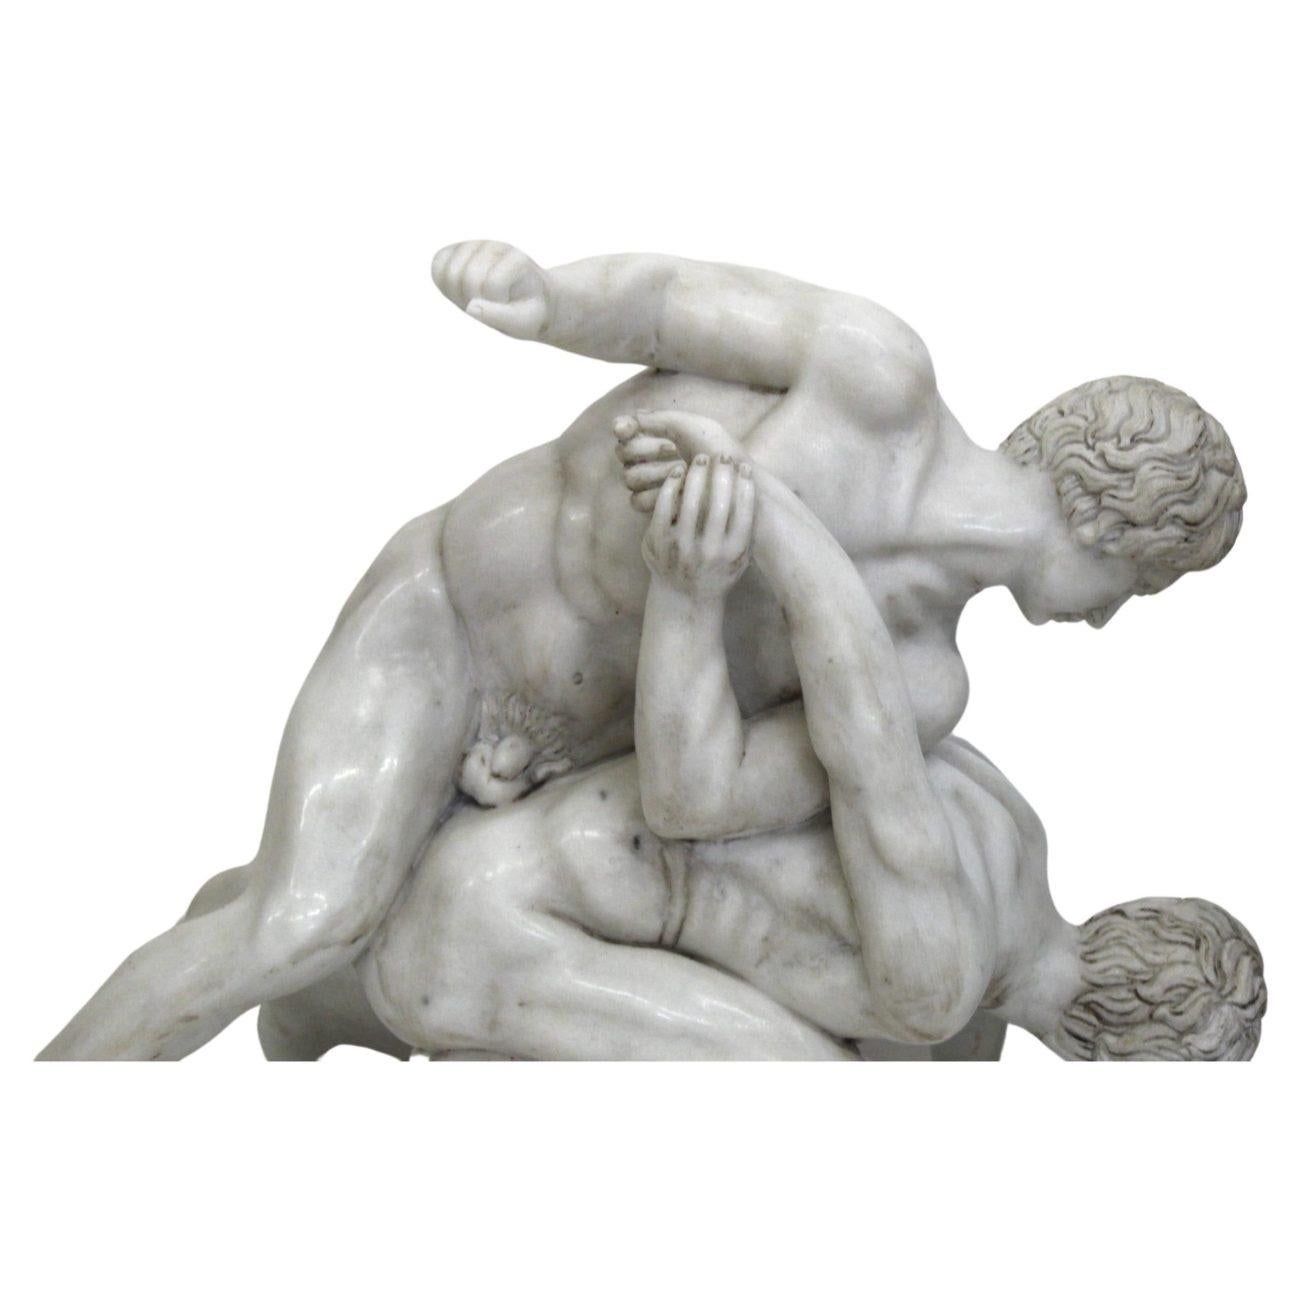 Sculpture of Wrestlers, in white marble, 20th century, made on the model of the Greco-Roman original, excellent condition. ADDITIONAL PHOTOS, INFORMATION OF THE LOT AND QUOTE FOR SHIPPING COST CAN BE REQUEST BY SENDING AN EMAIL, ULTERIORI FOTO,